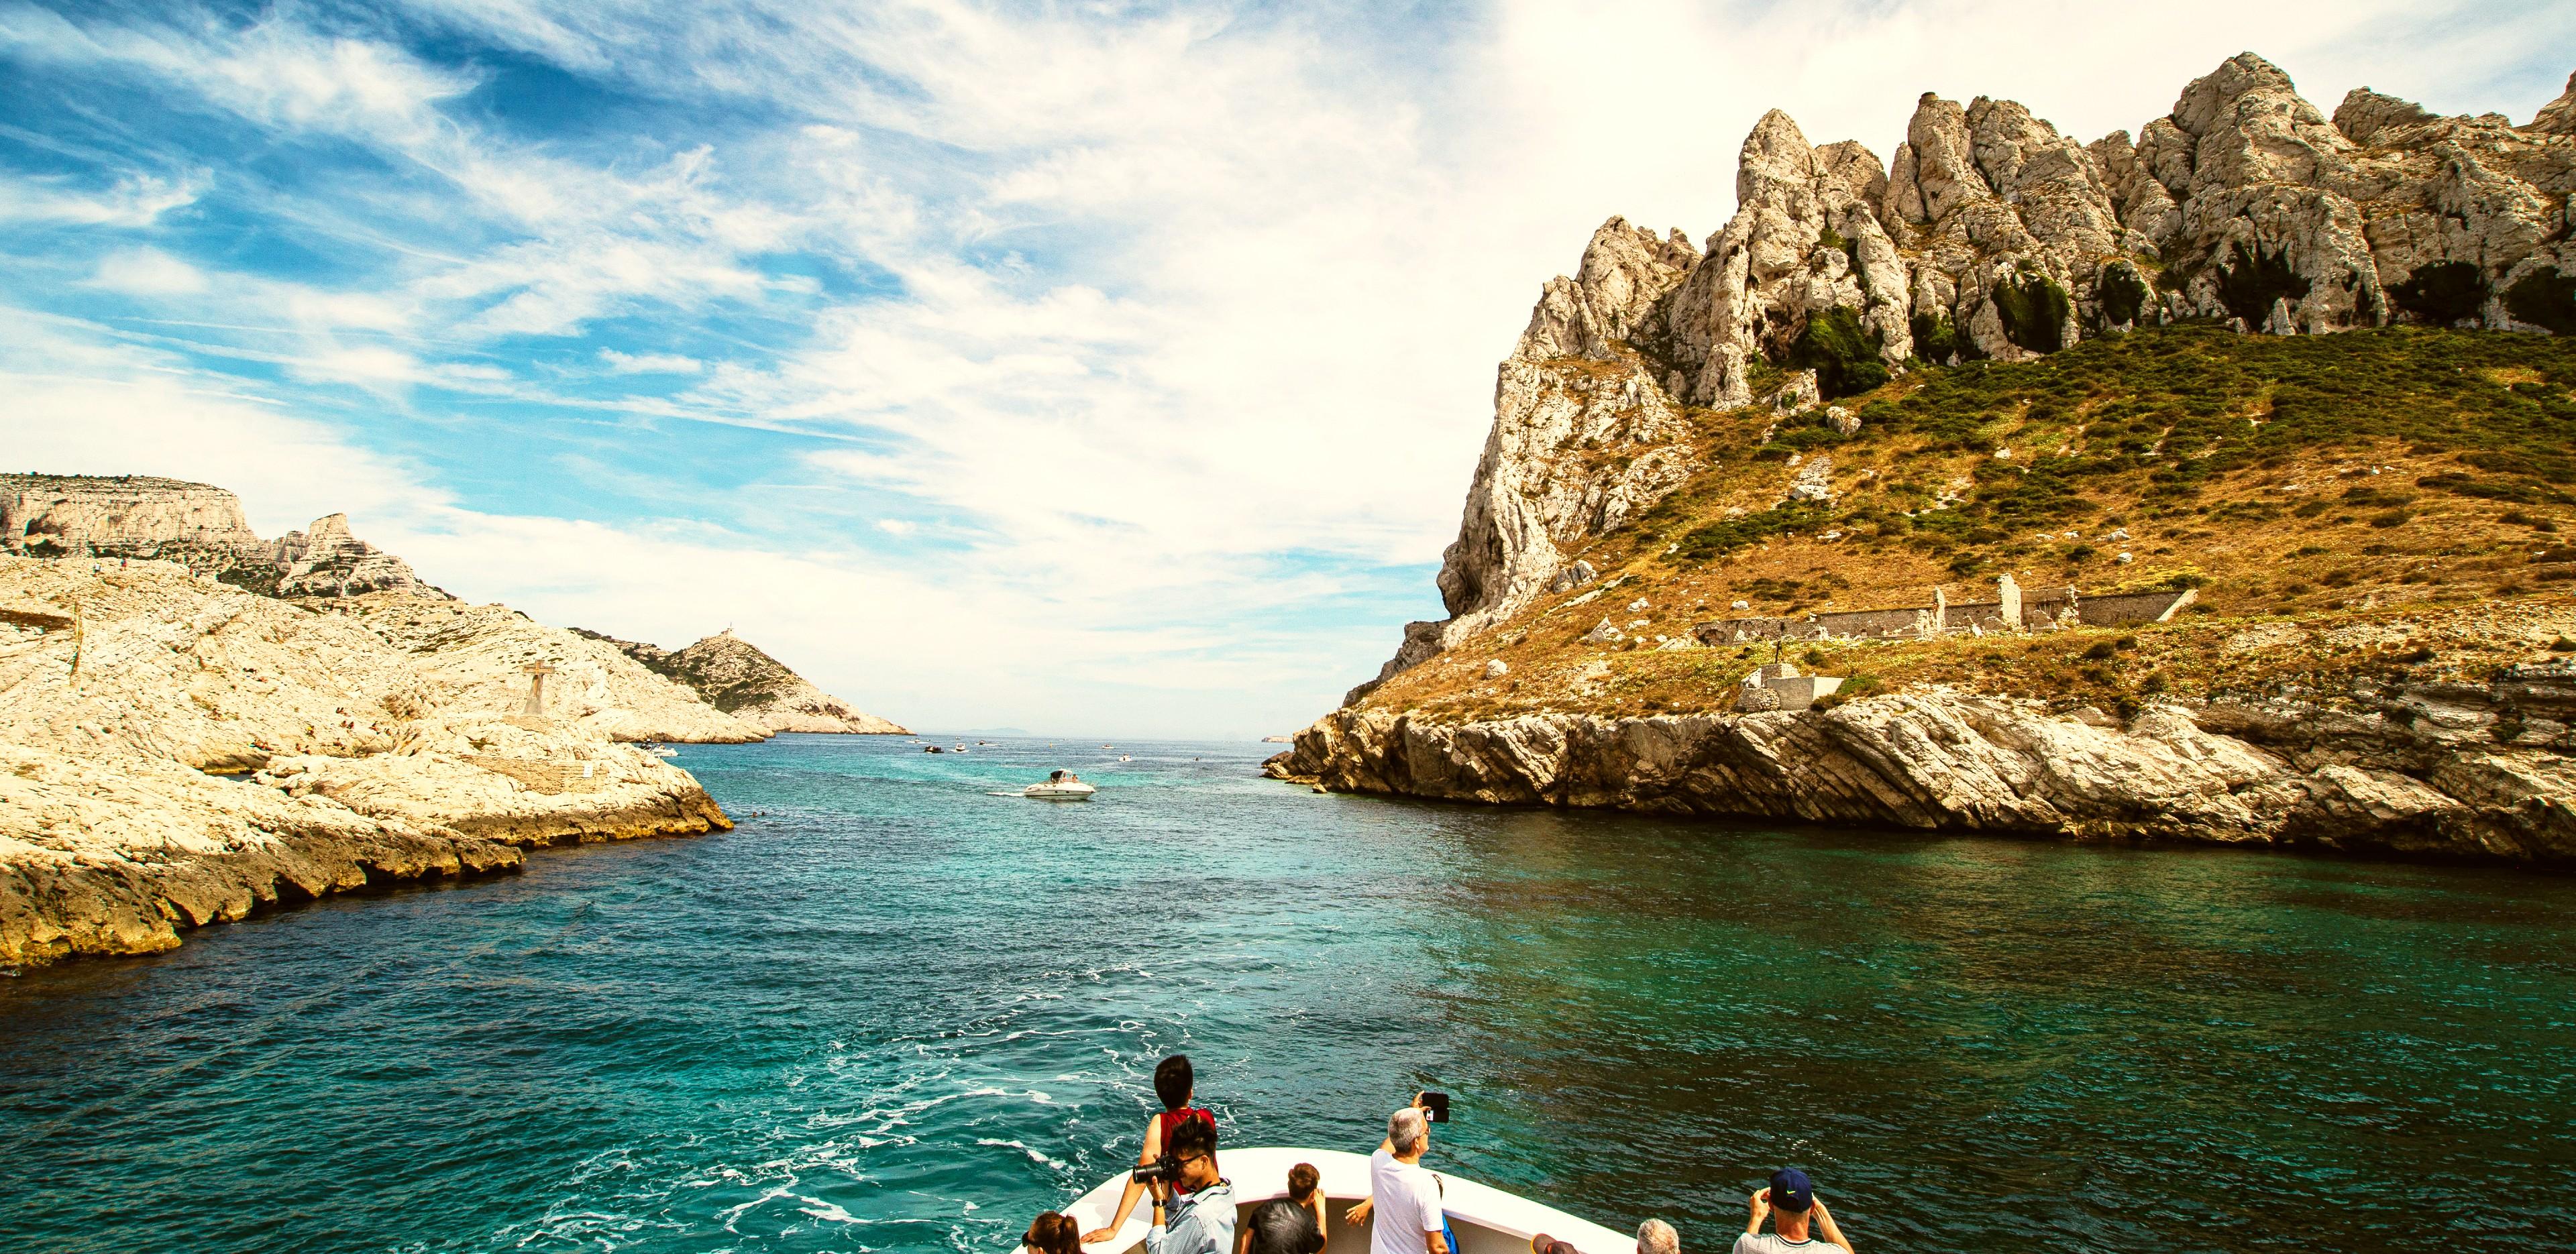 boat trip to calanques from marseille